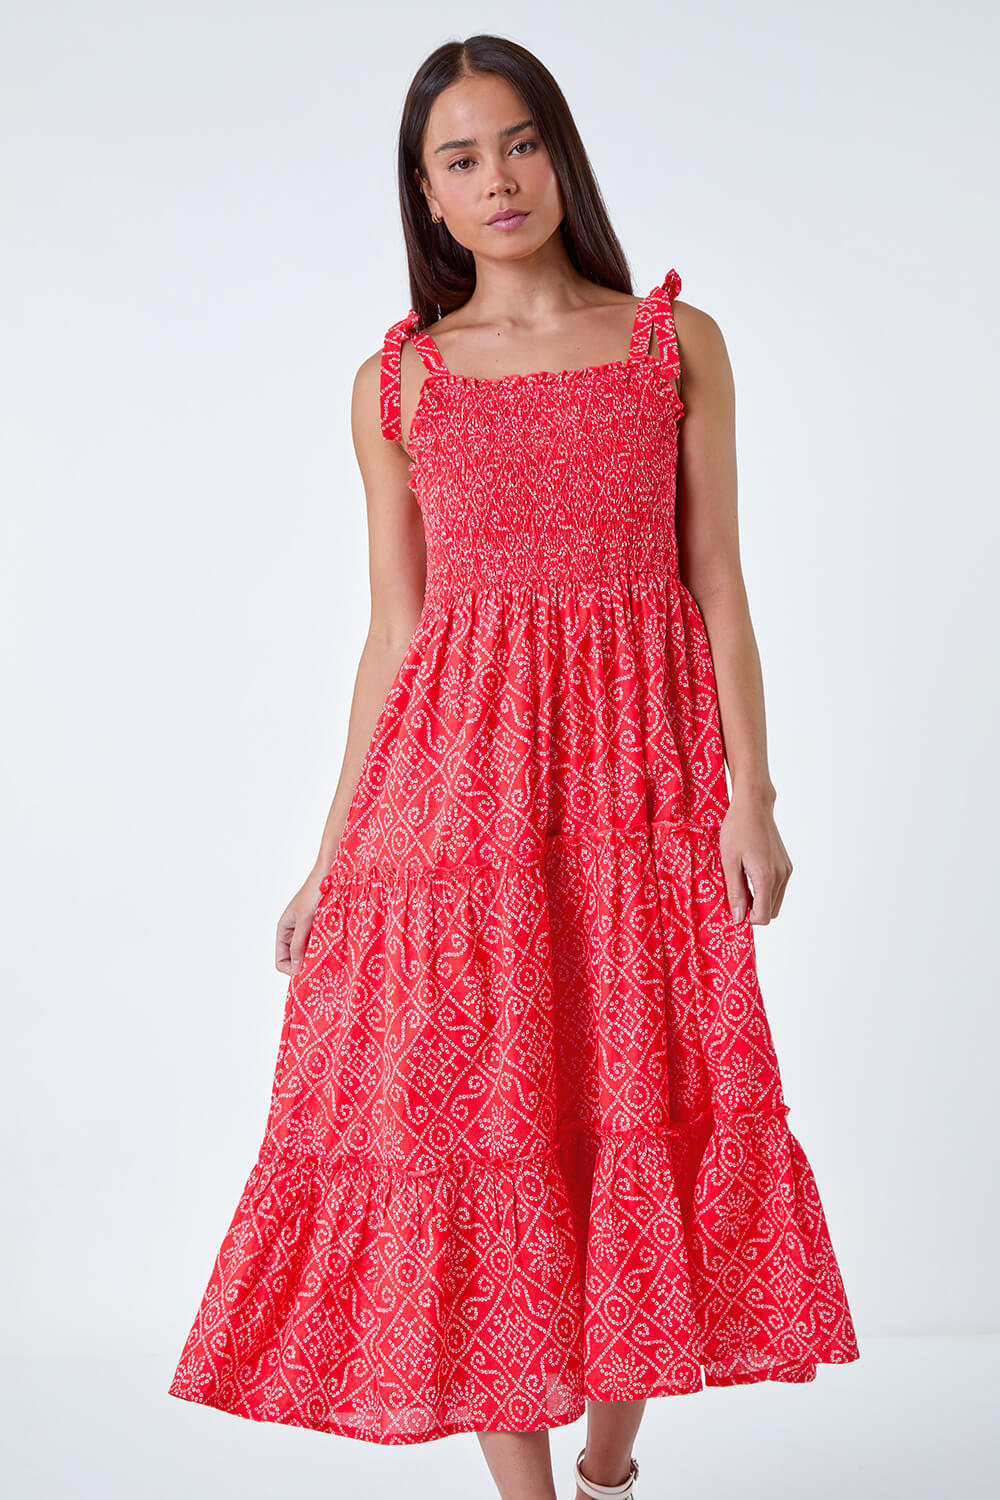 CORAL Petite Cotton Broderie Shirred Maxi Dress, Image 4 of 5